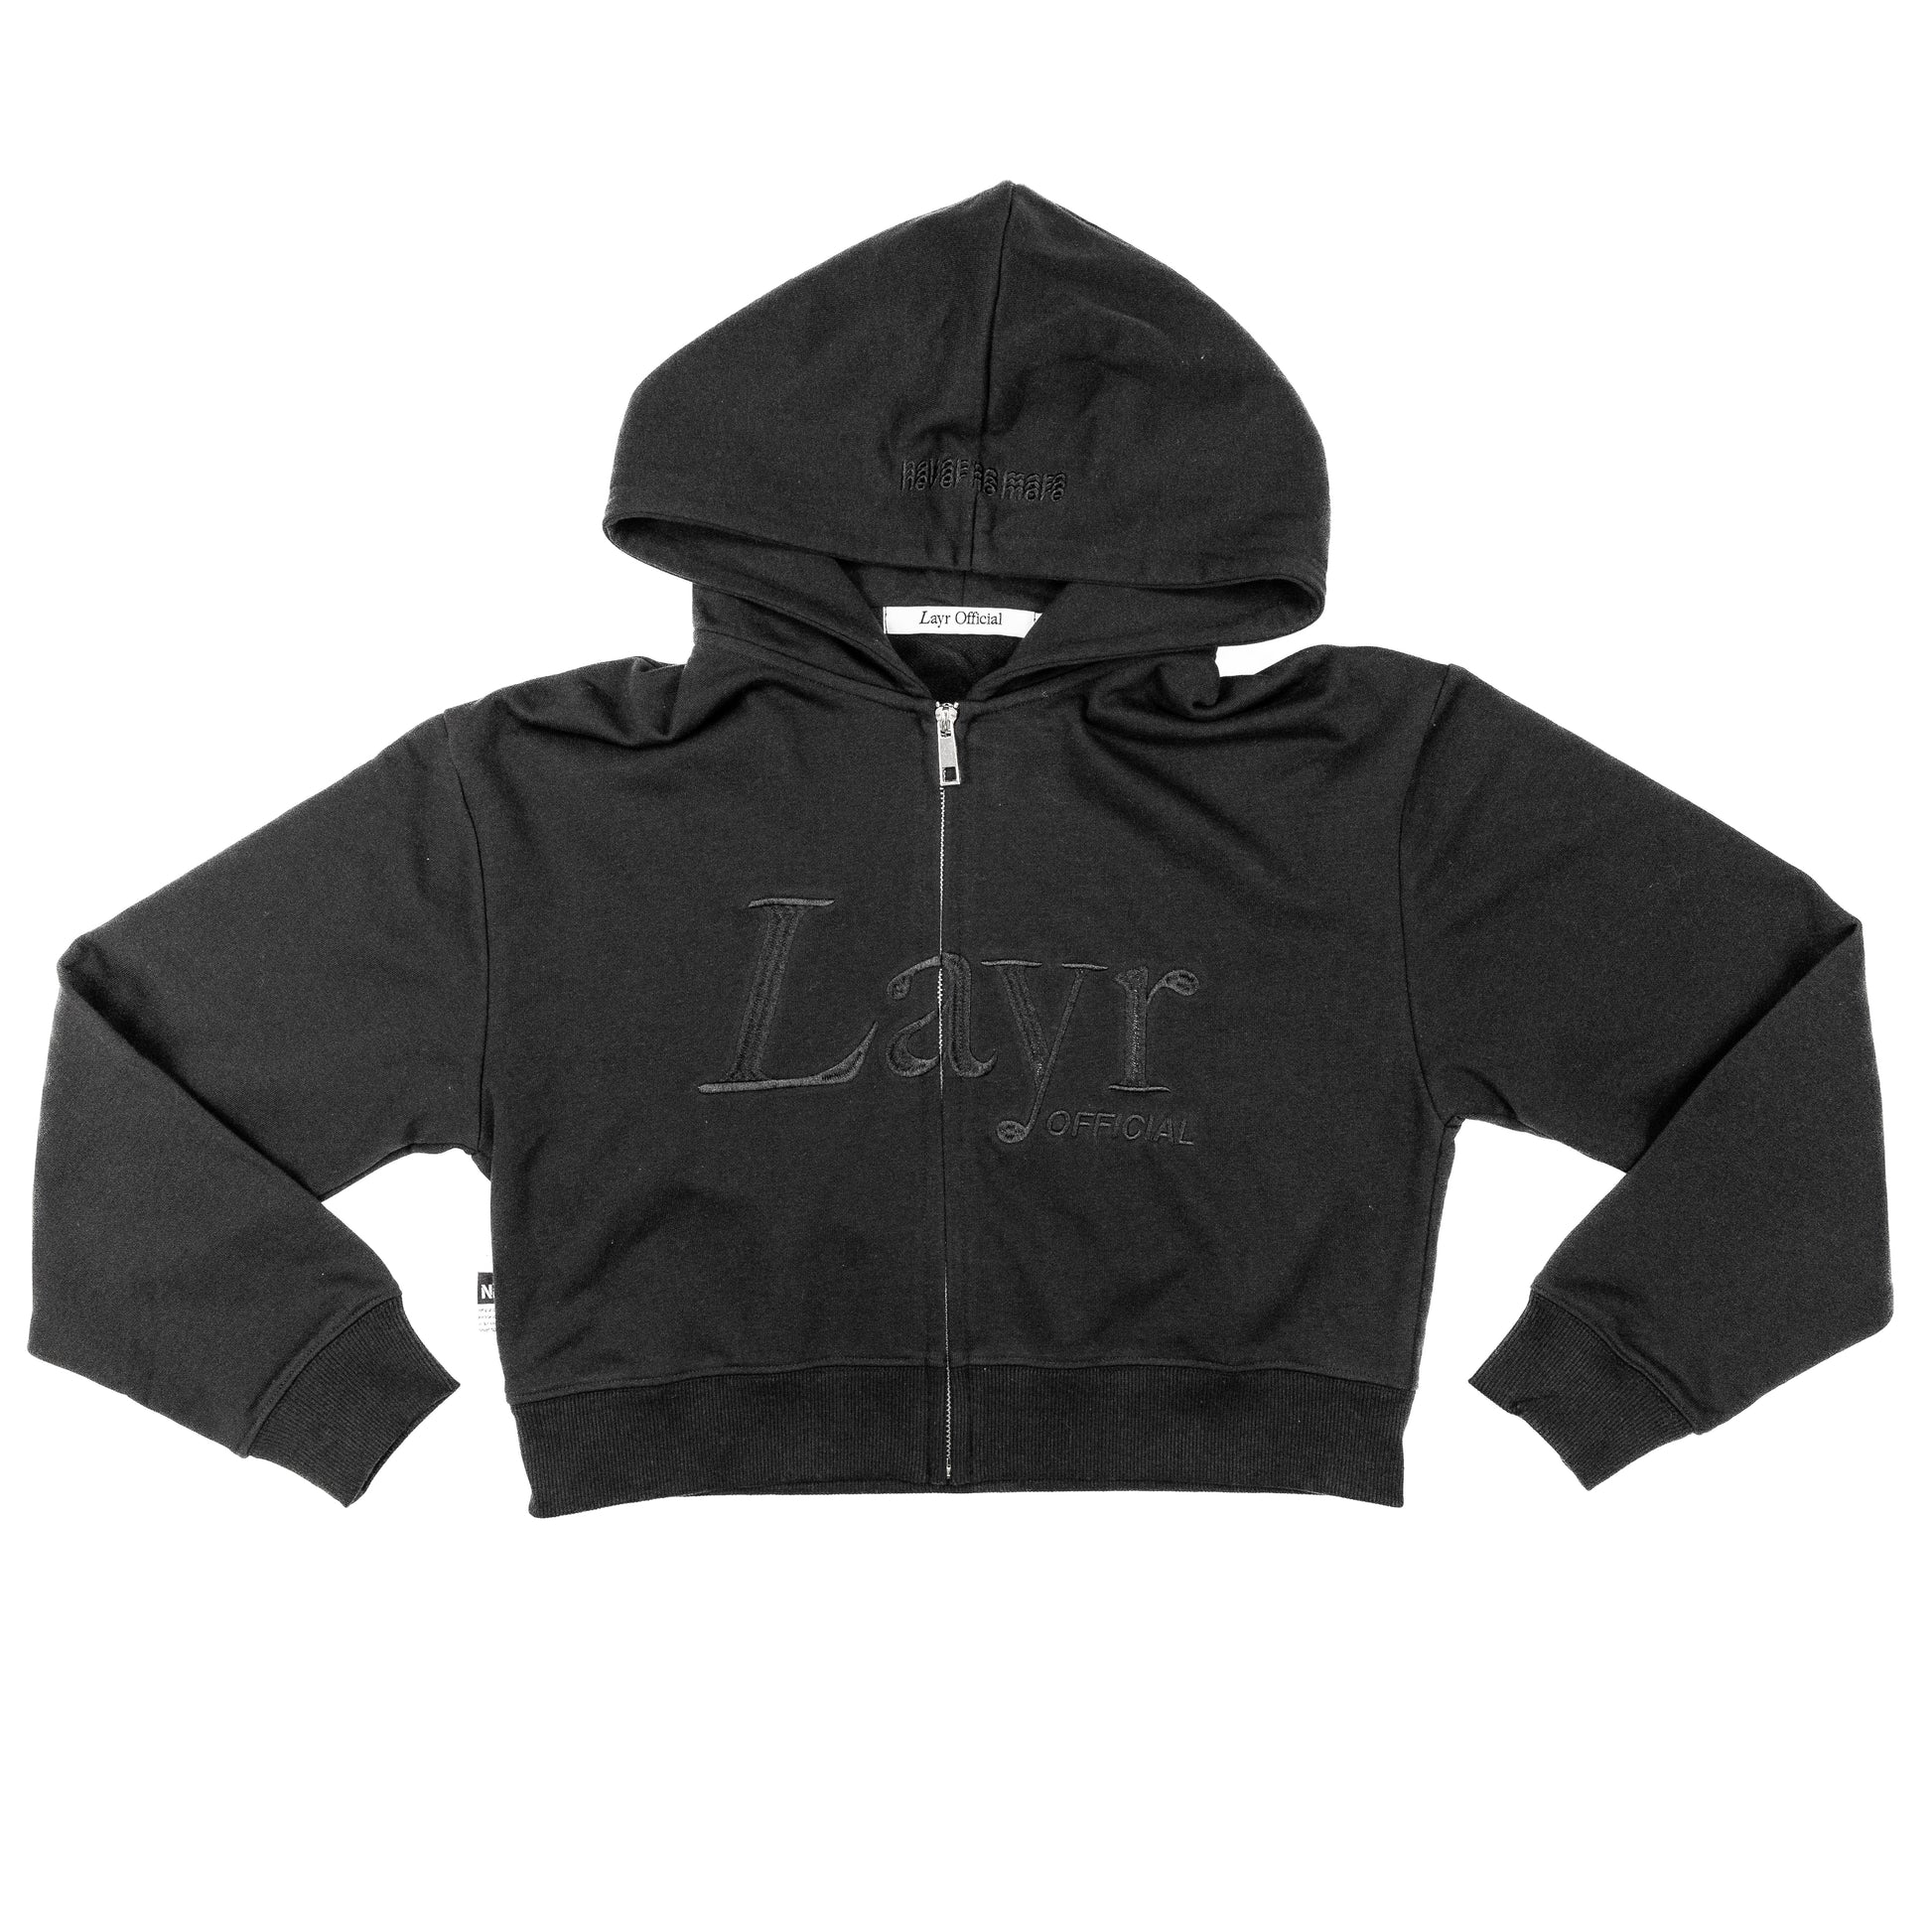 Womens Layr Official Crop Hoodie, Black - Layr Official